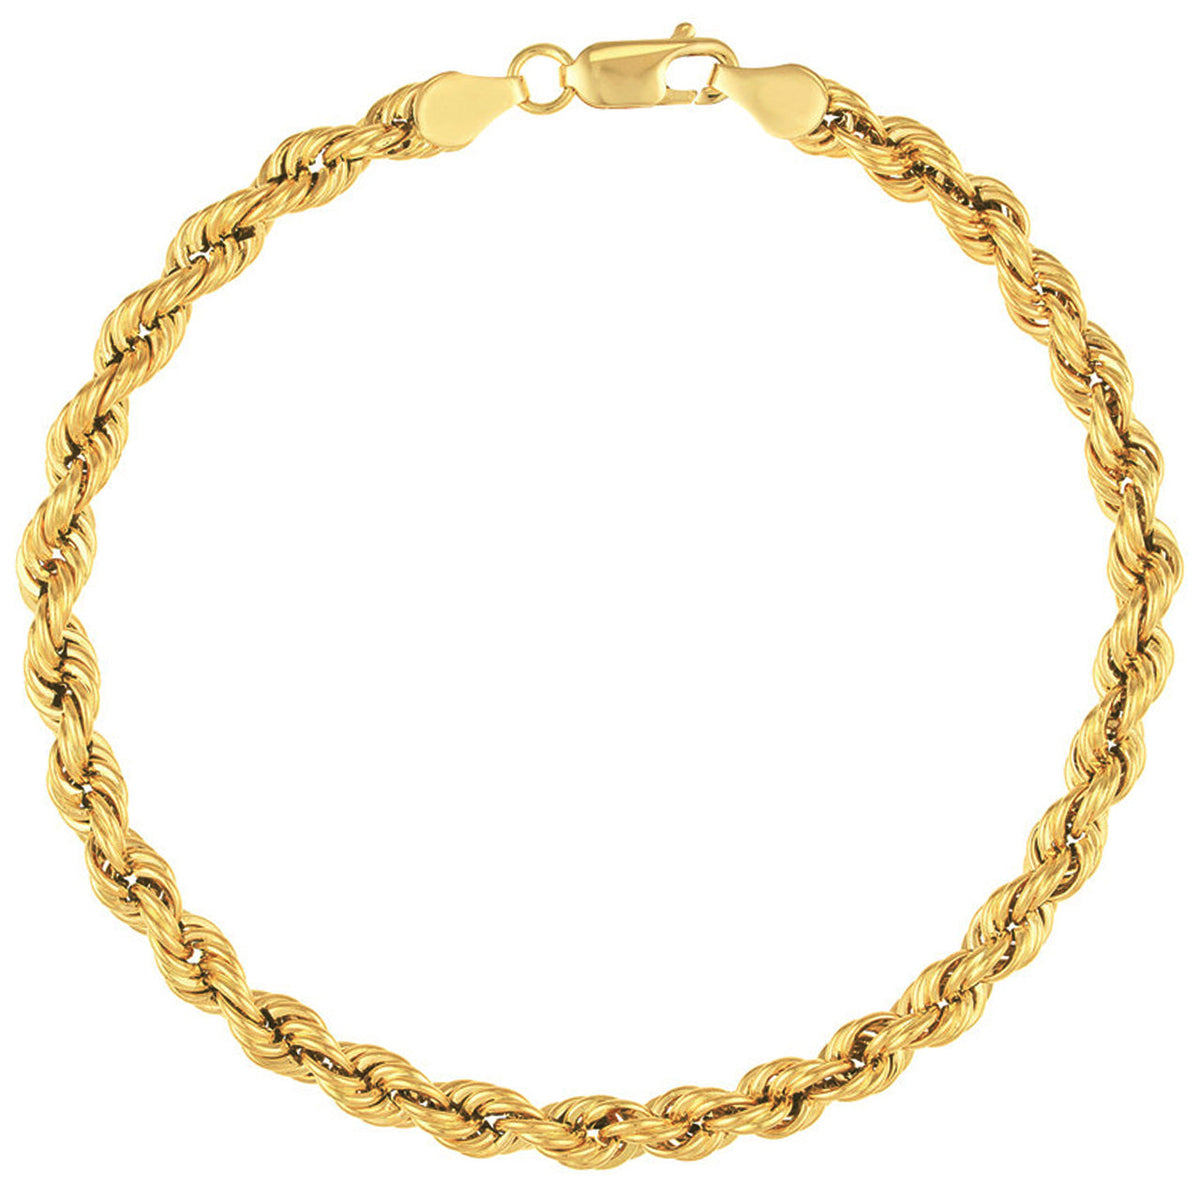 14k Yellow Gold Hollow 7mm Rope Chain Bracelet with Lobster Lock - Light Rope Chain Bracelet with Diamond Cut